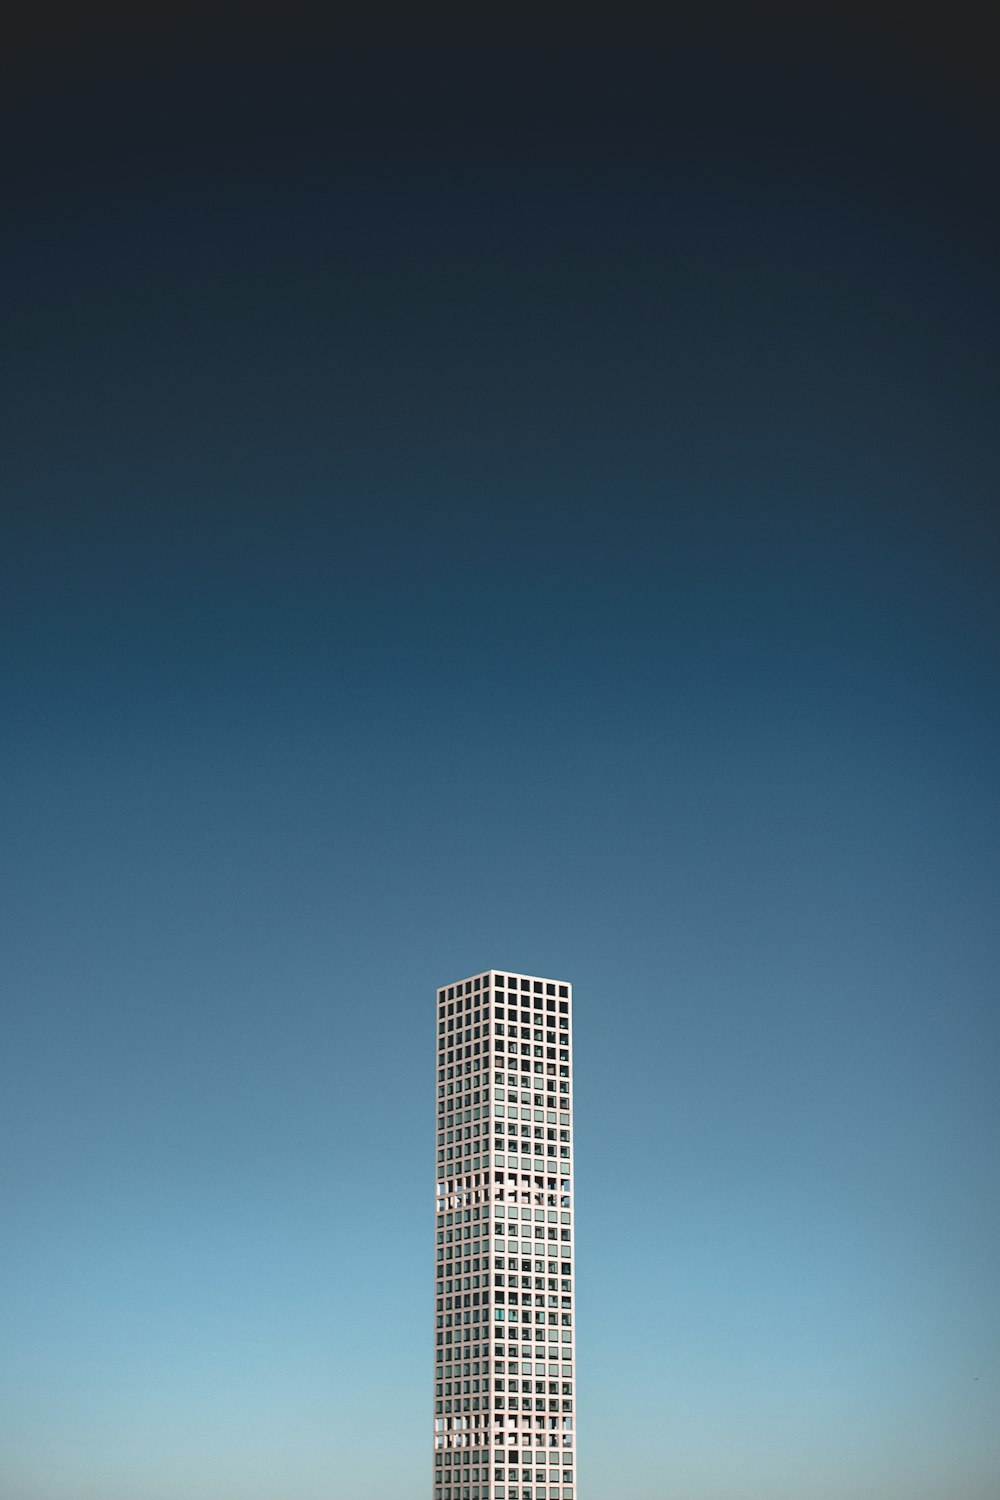 white high rise building under blue sky during daytime